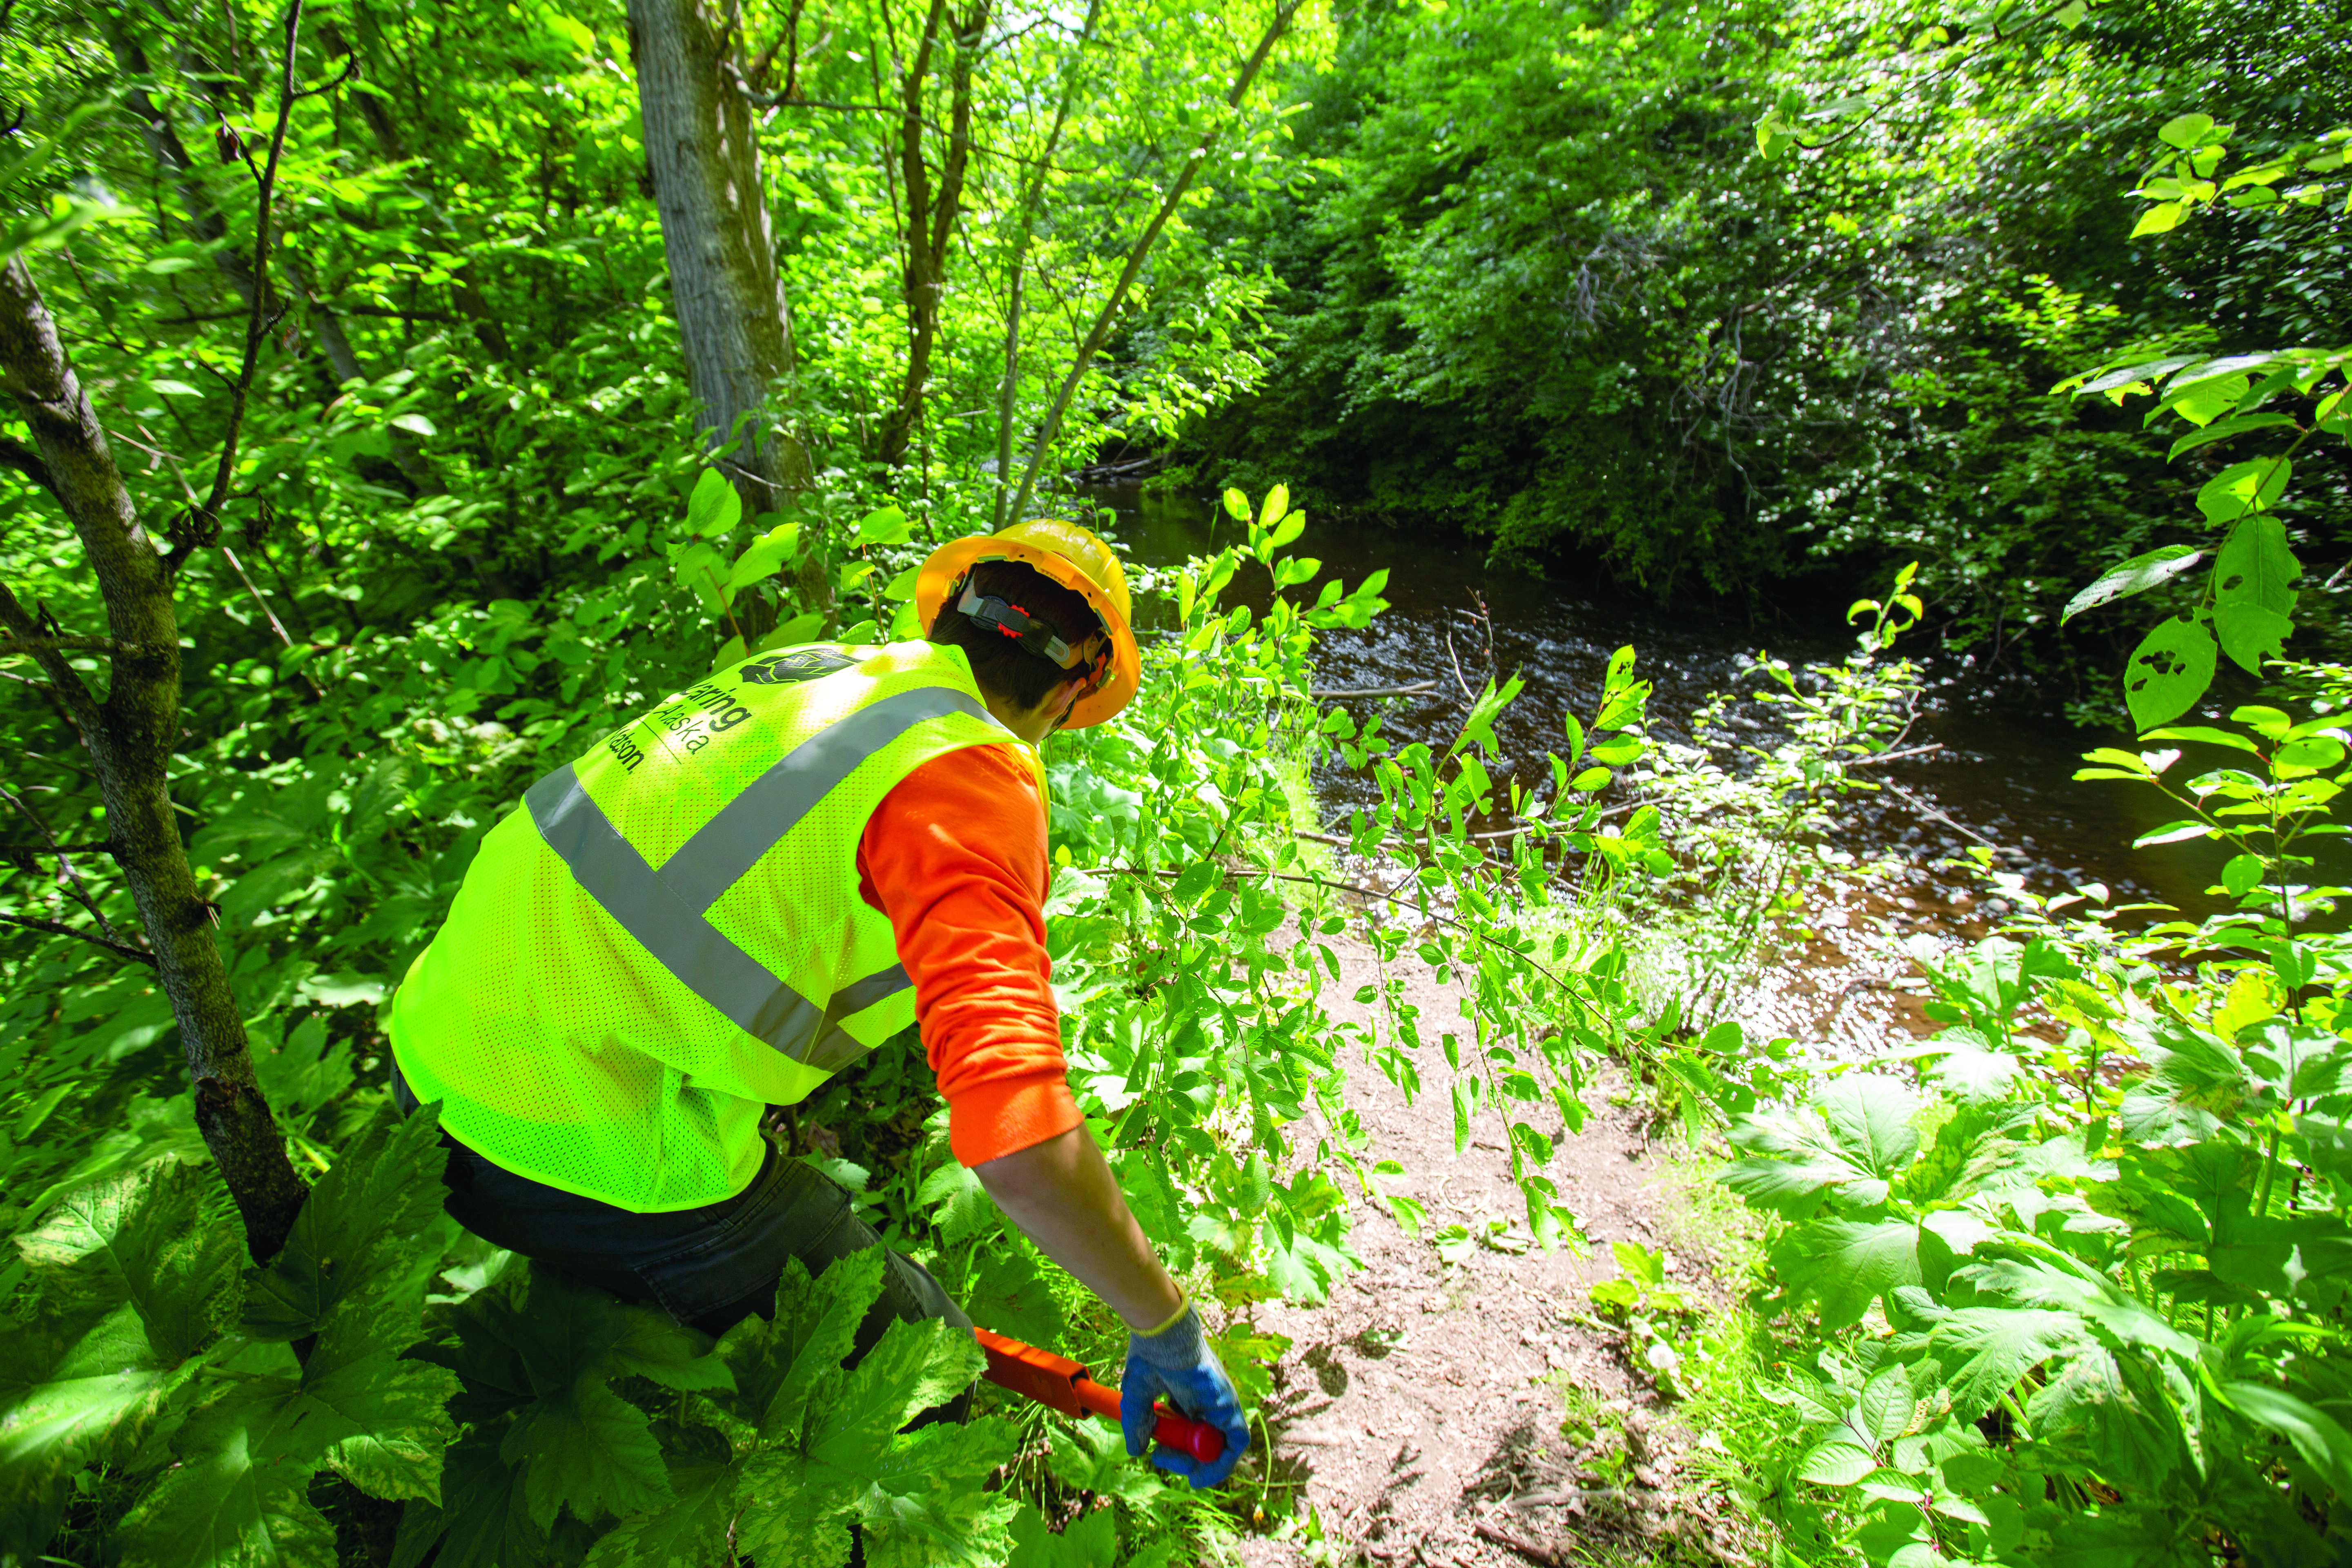 An Anchorage Park Foundation’s Youth Employment in Parks participant wears a yellow Caring for Alaska vest and trims an invasive species near a creek.